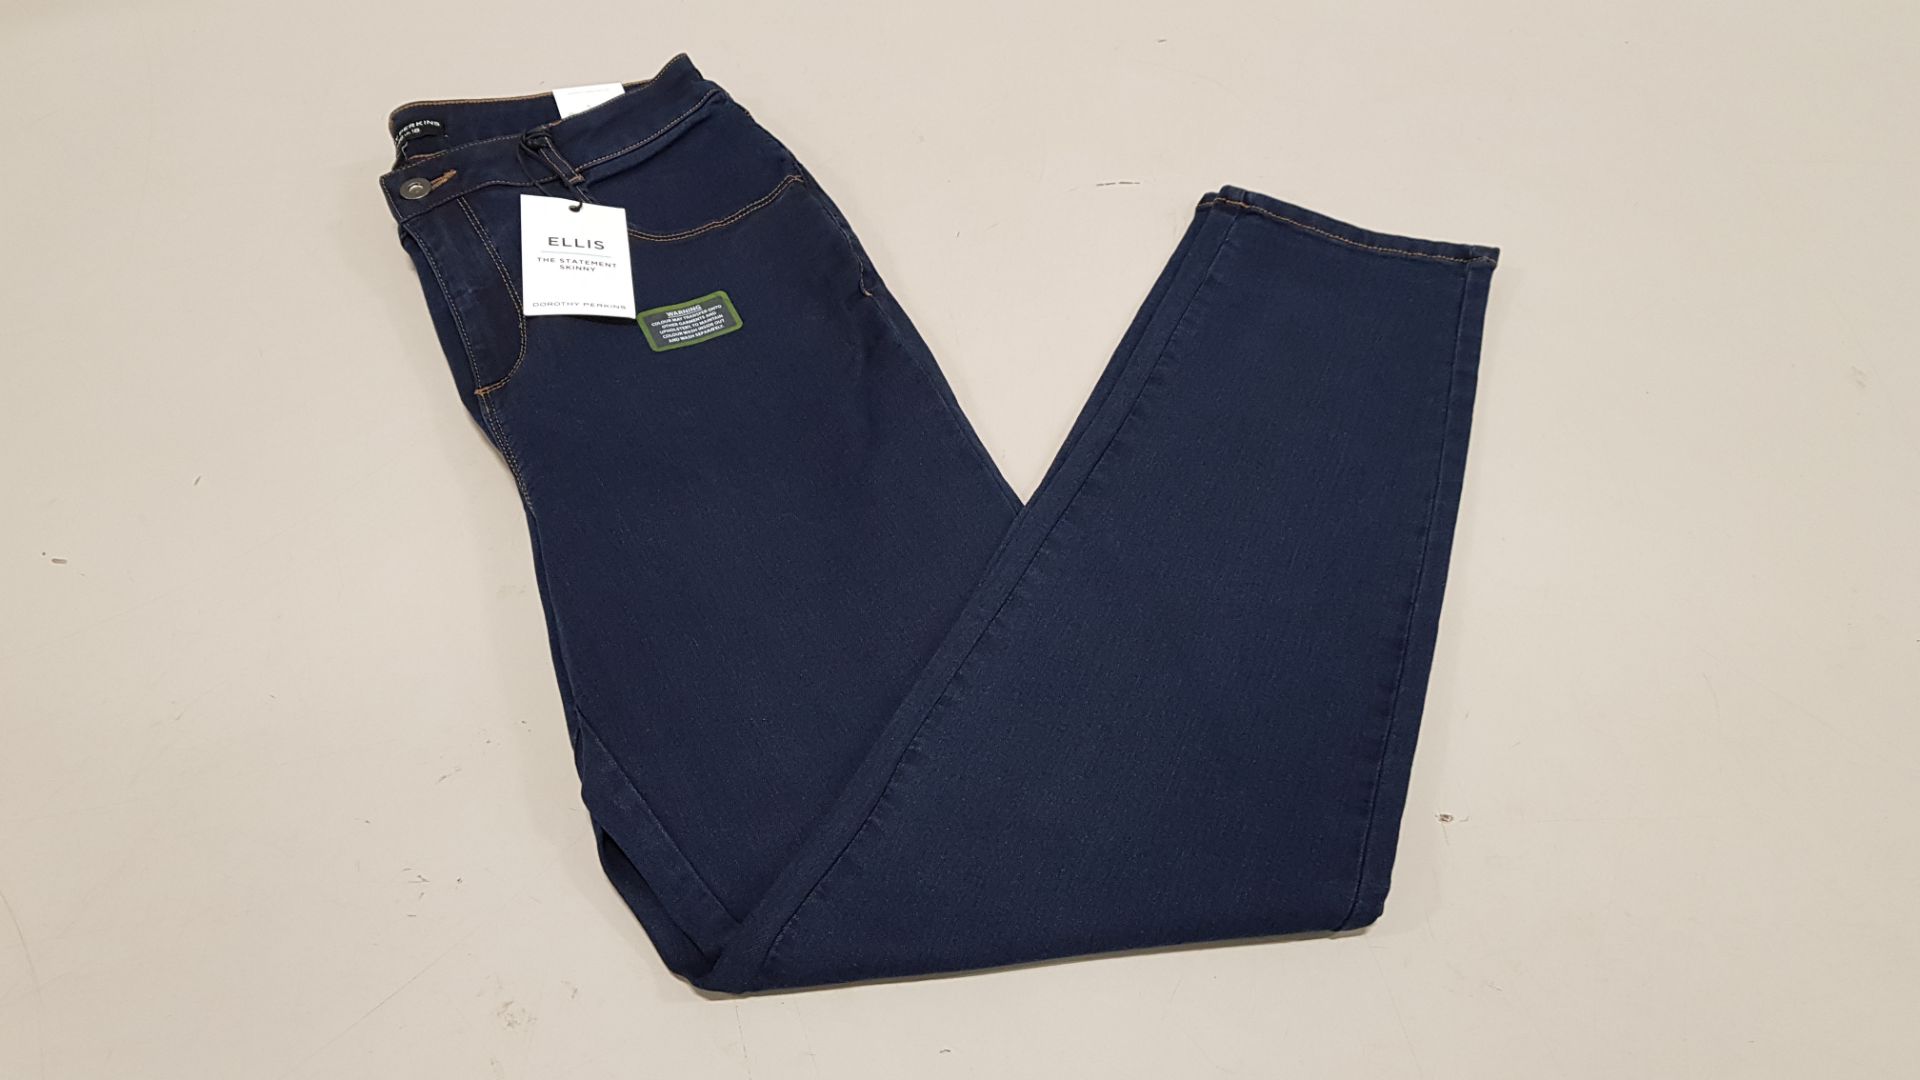 20 X BRAND NEW DOROTHY PERKINS DP CURVE JEANS UK SIZE 20 RRP £15.00 (TOTAL RRP £300.00)